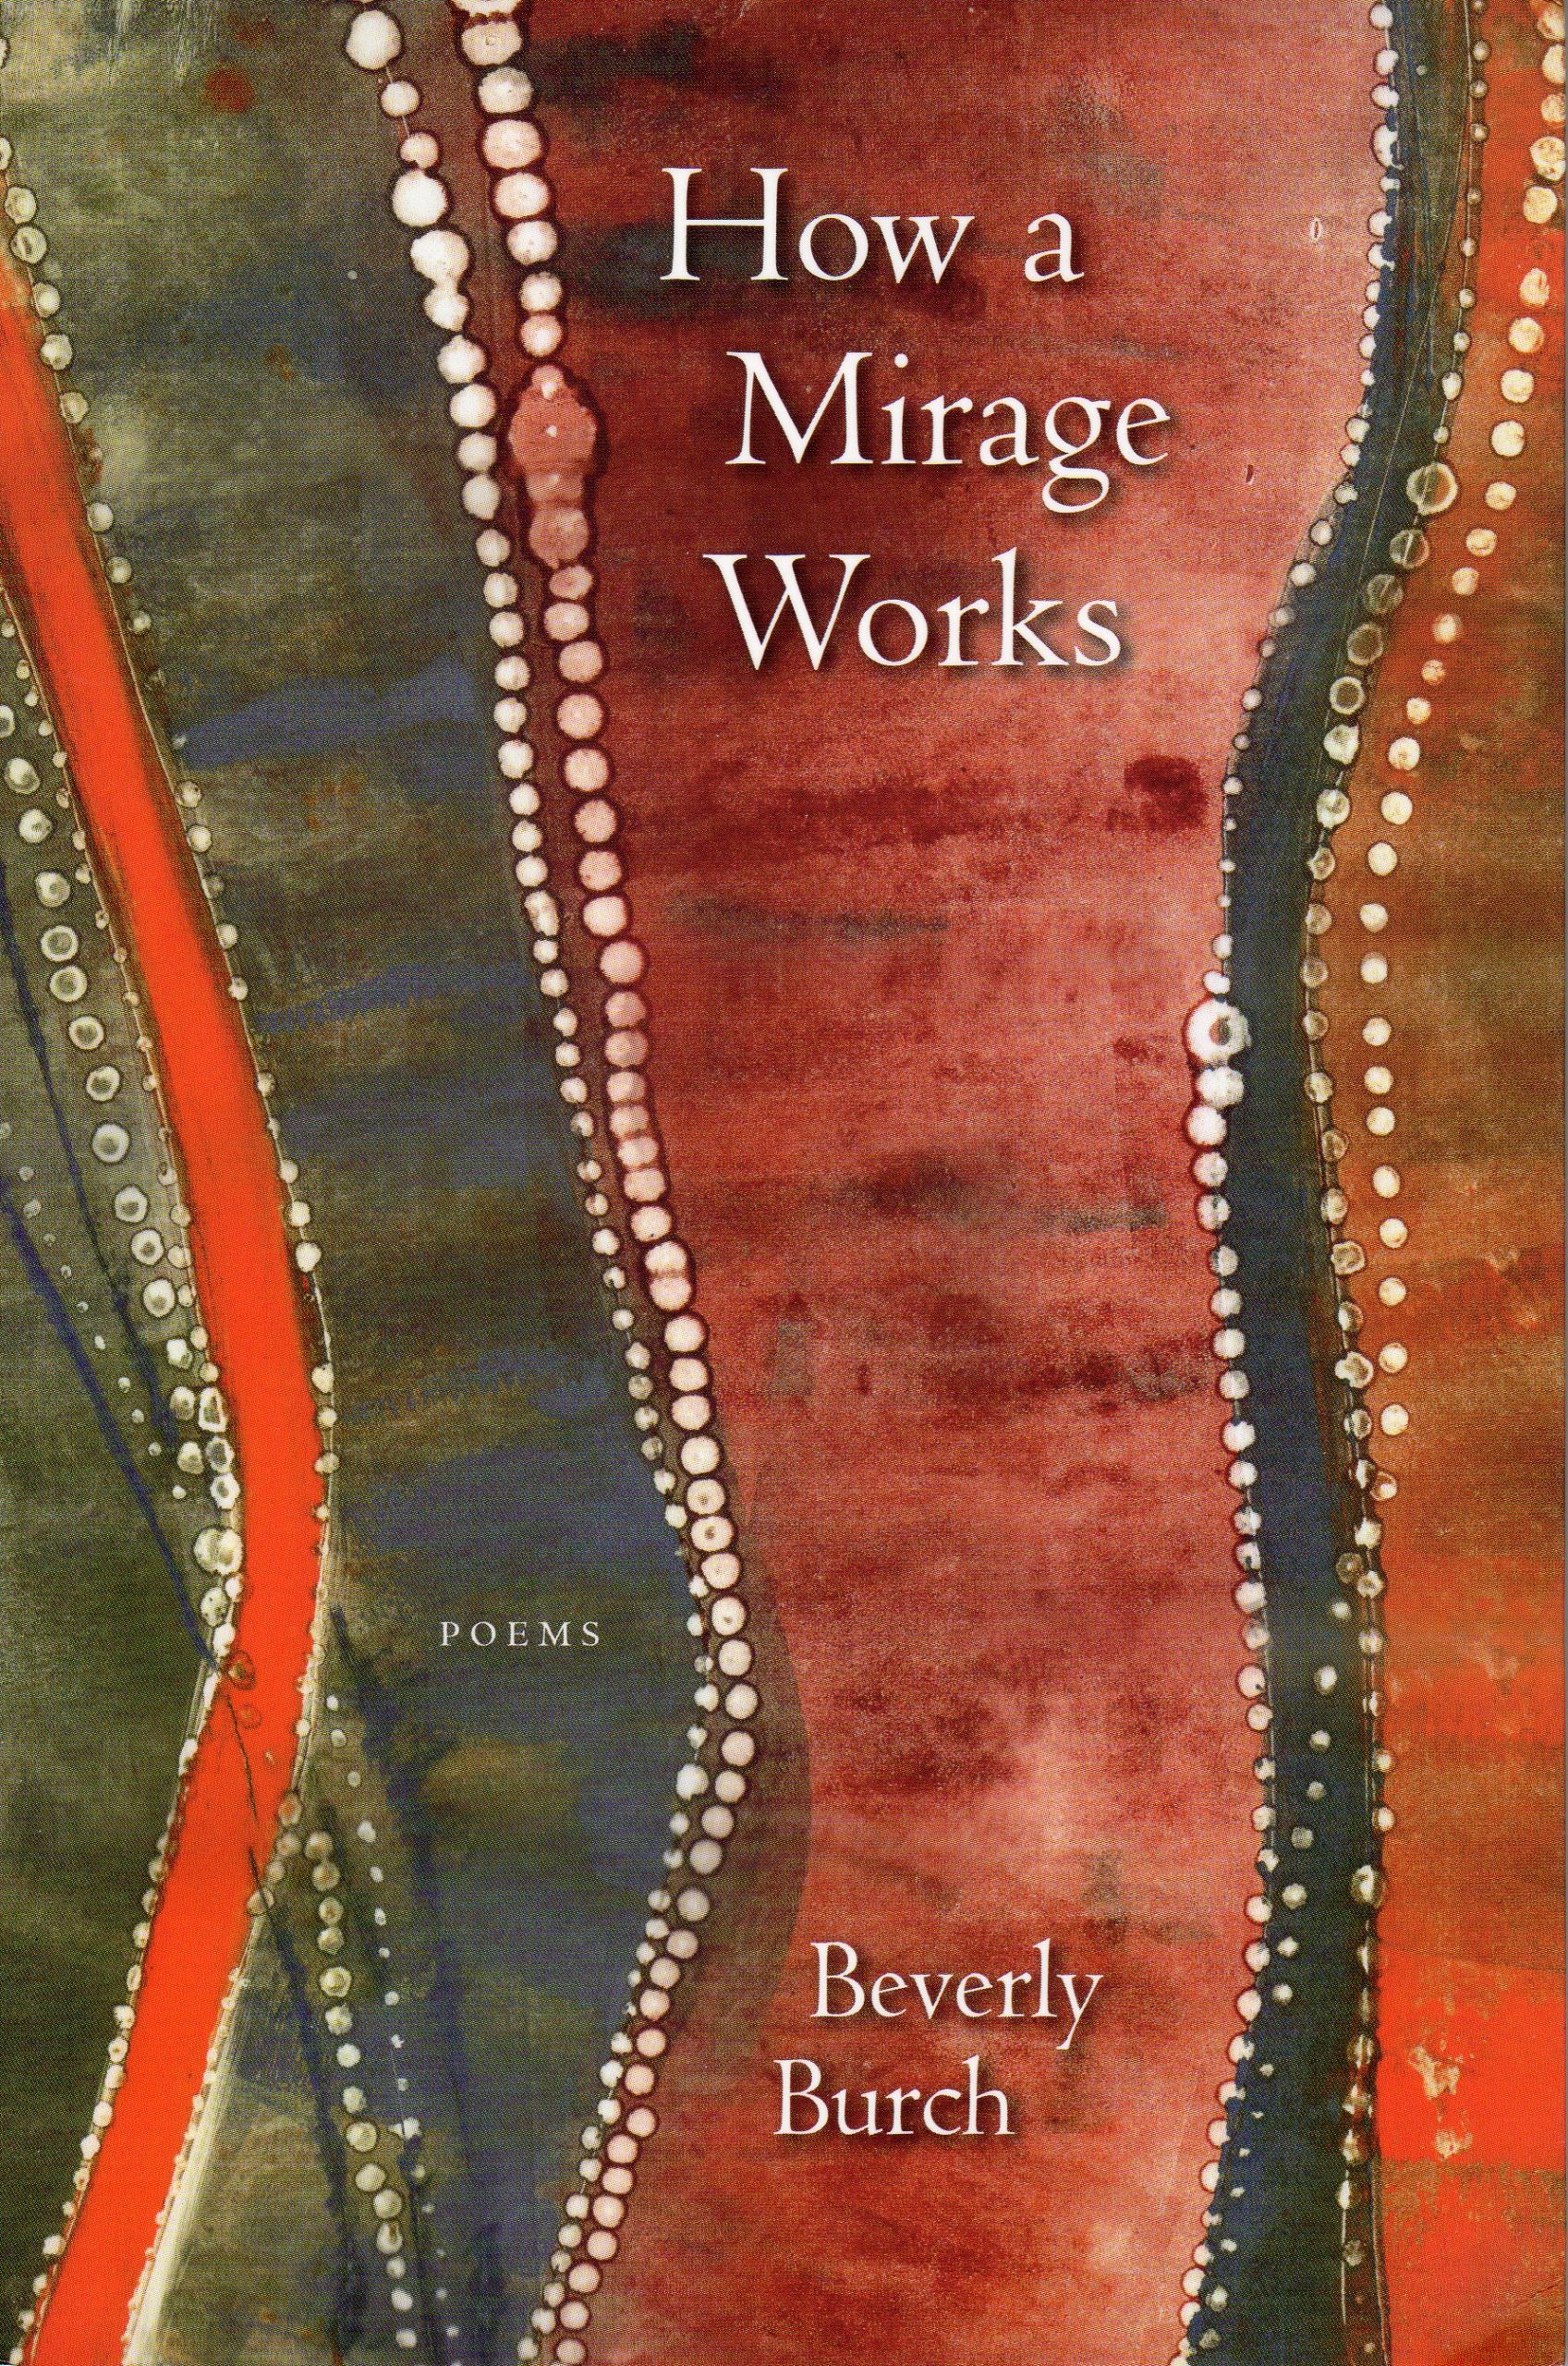 how-a-mirage-works-by-beverly-burch.jpg